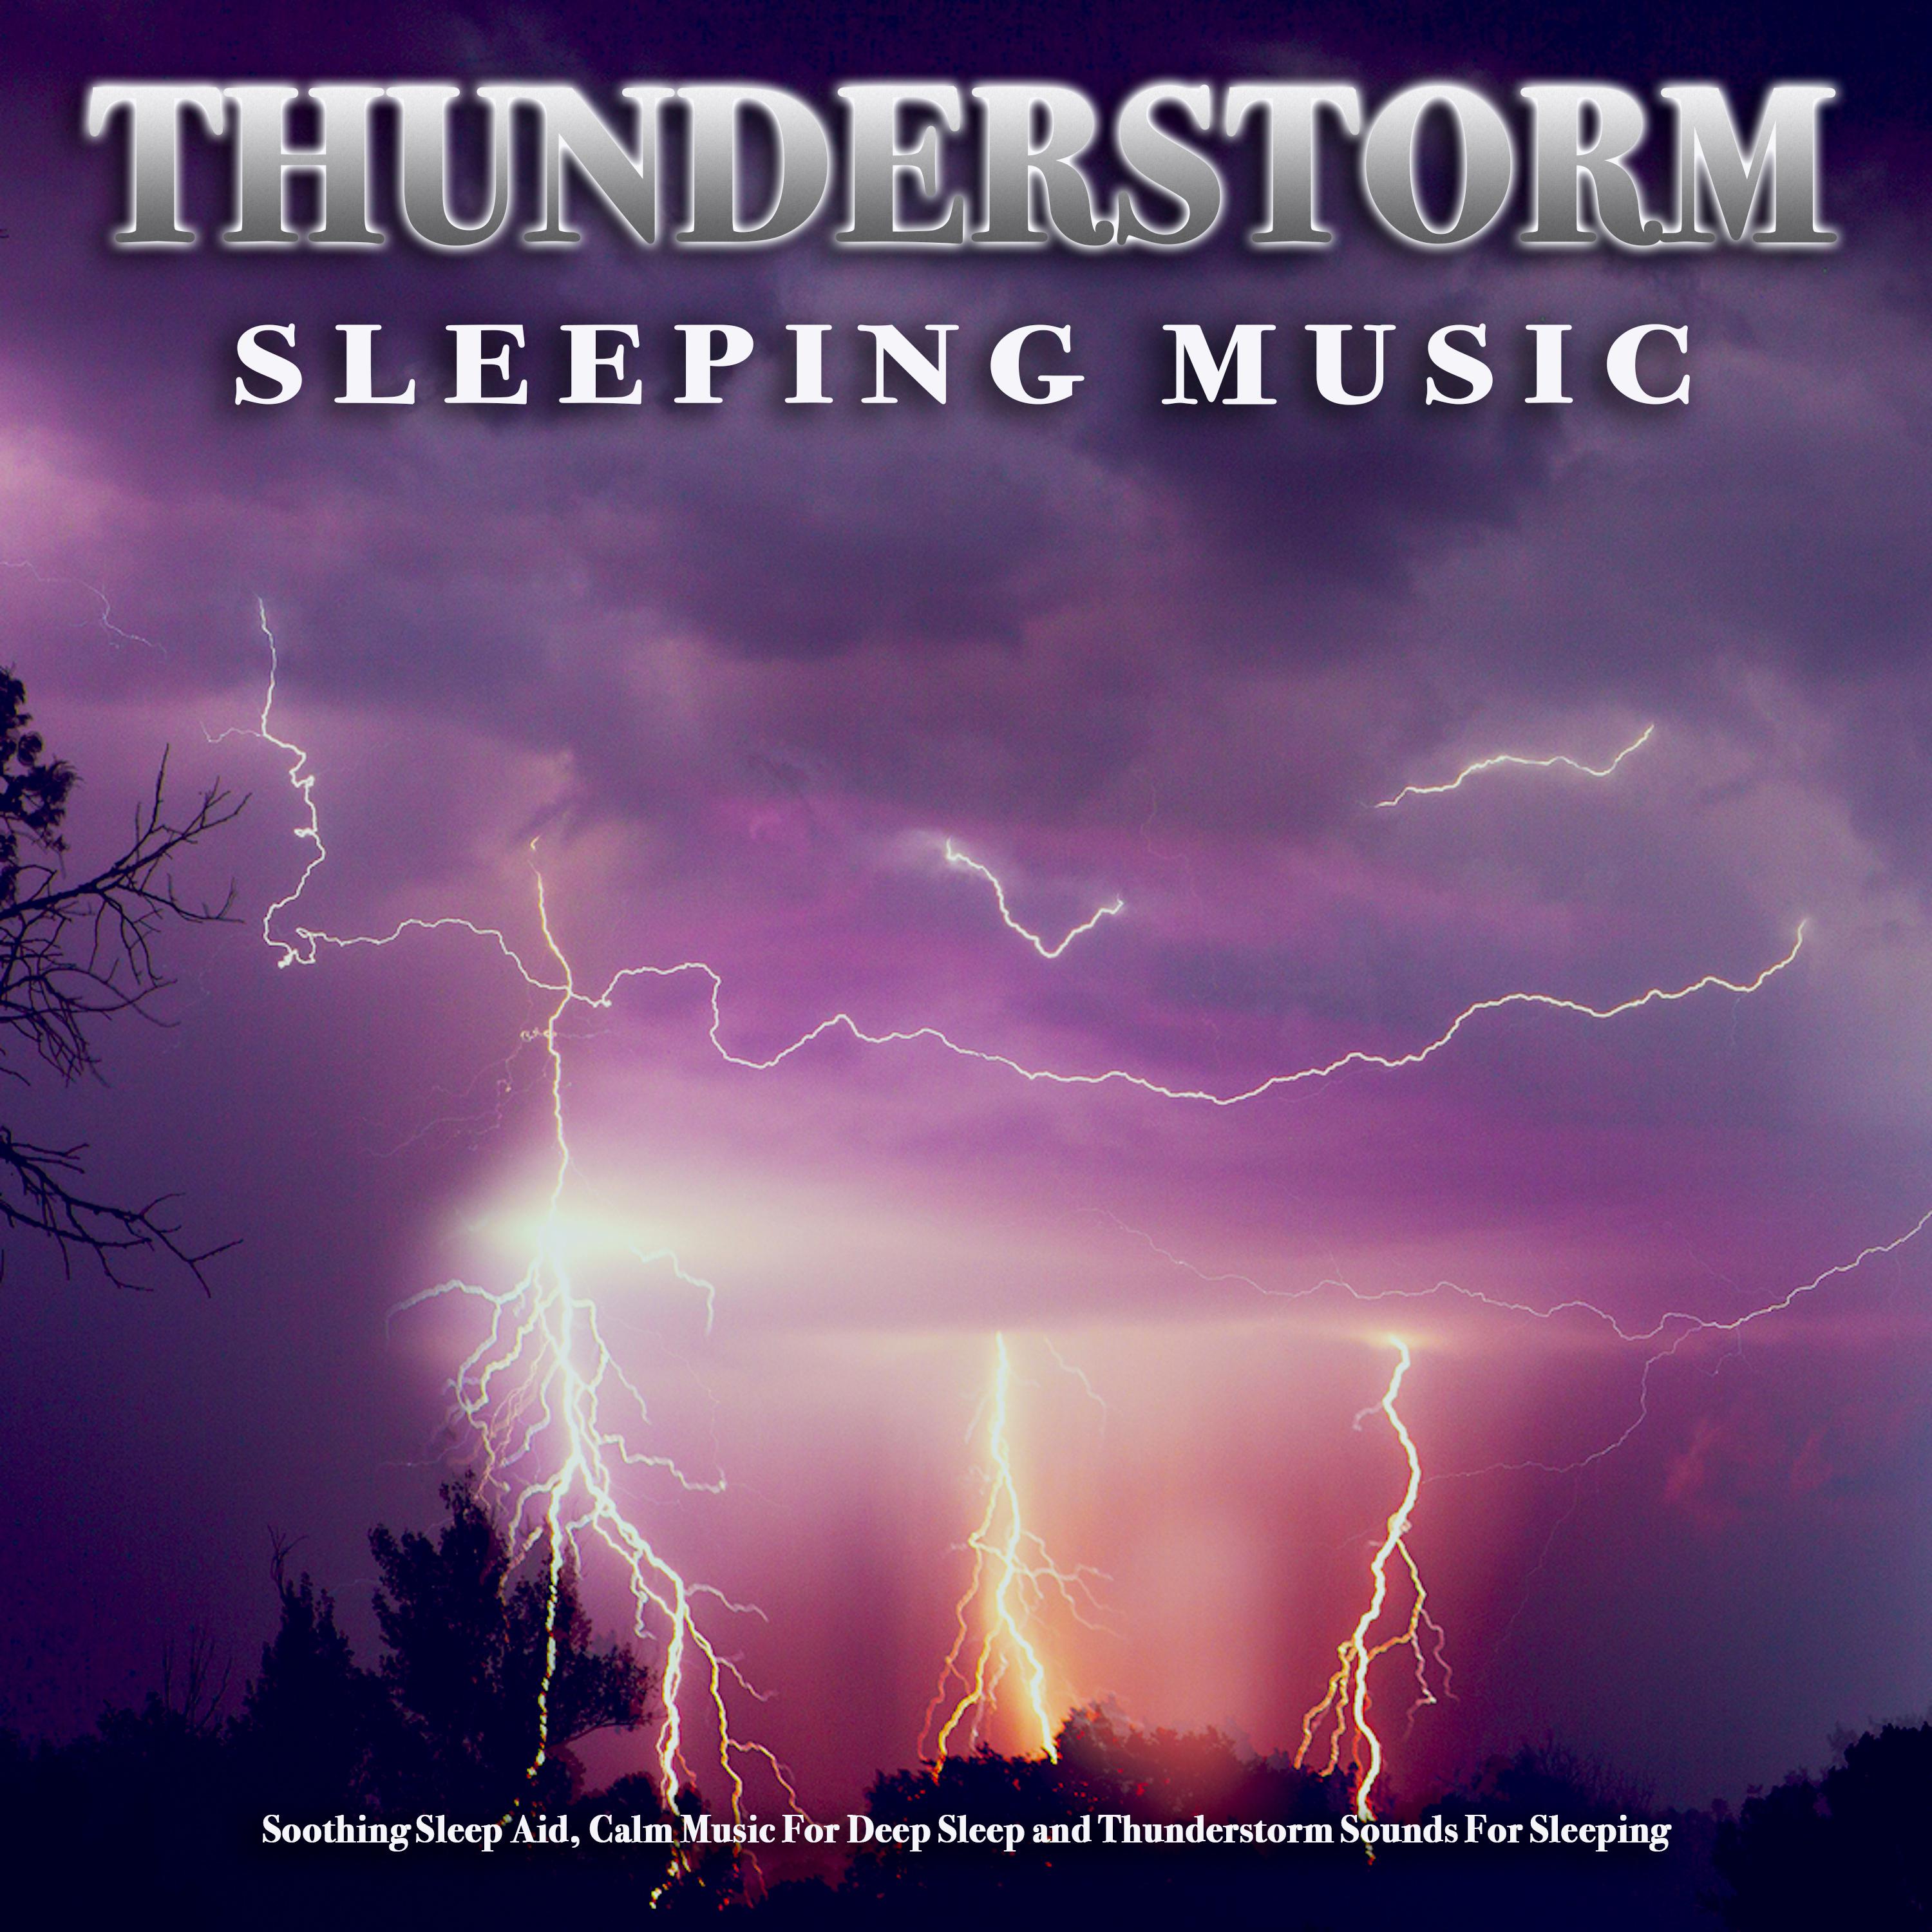 Music For Sleep and Thunderstorm Sounds